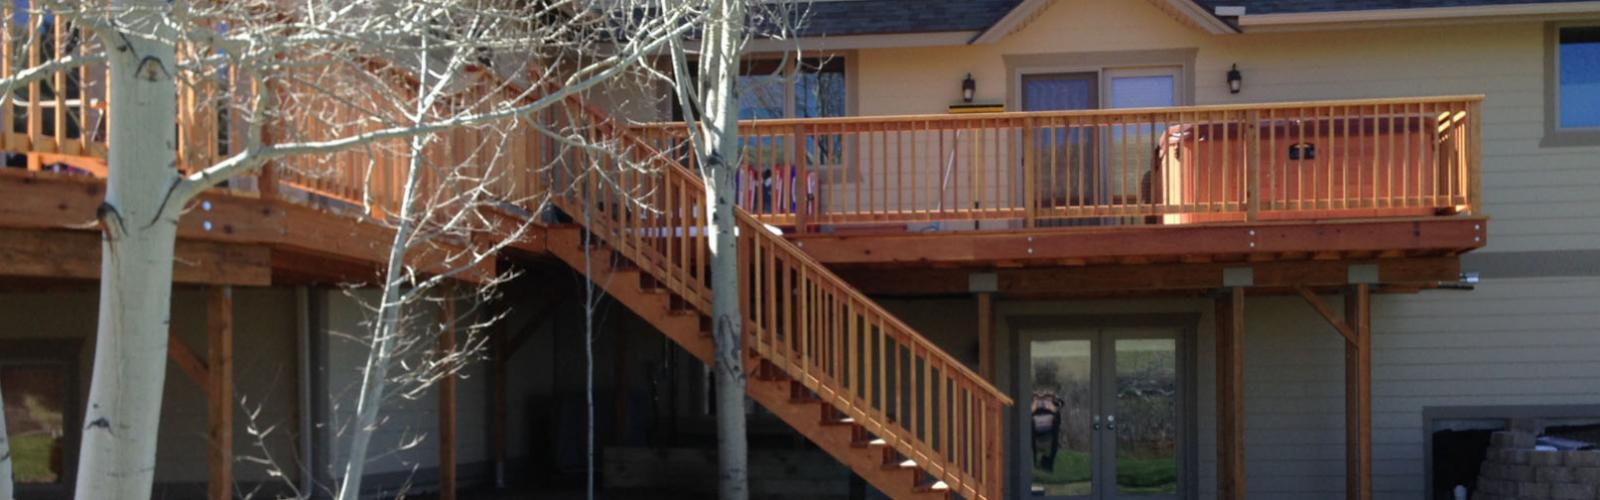 completed deck stairs and rail